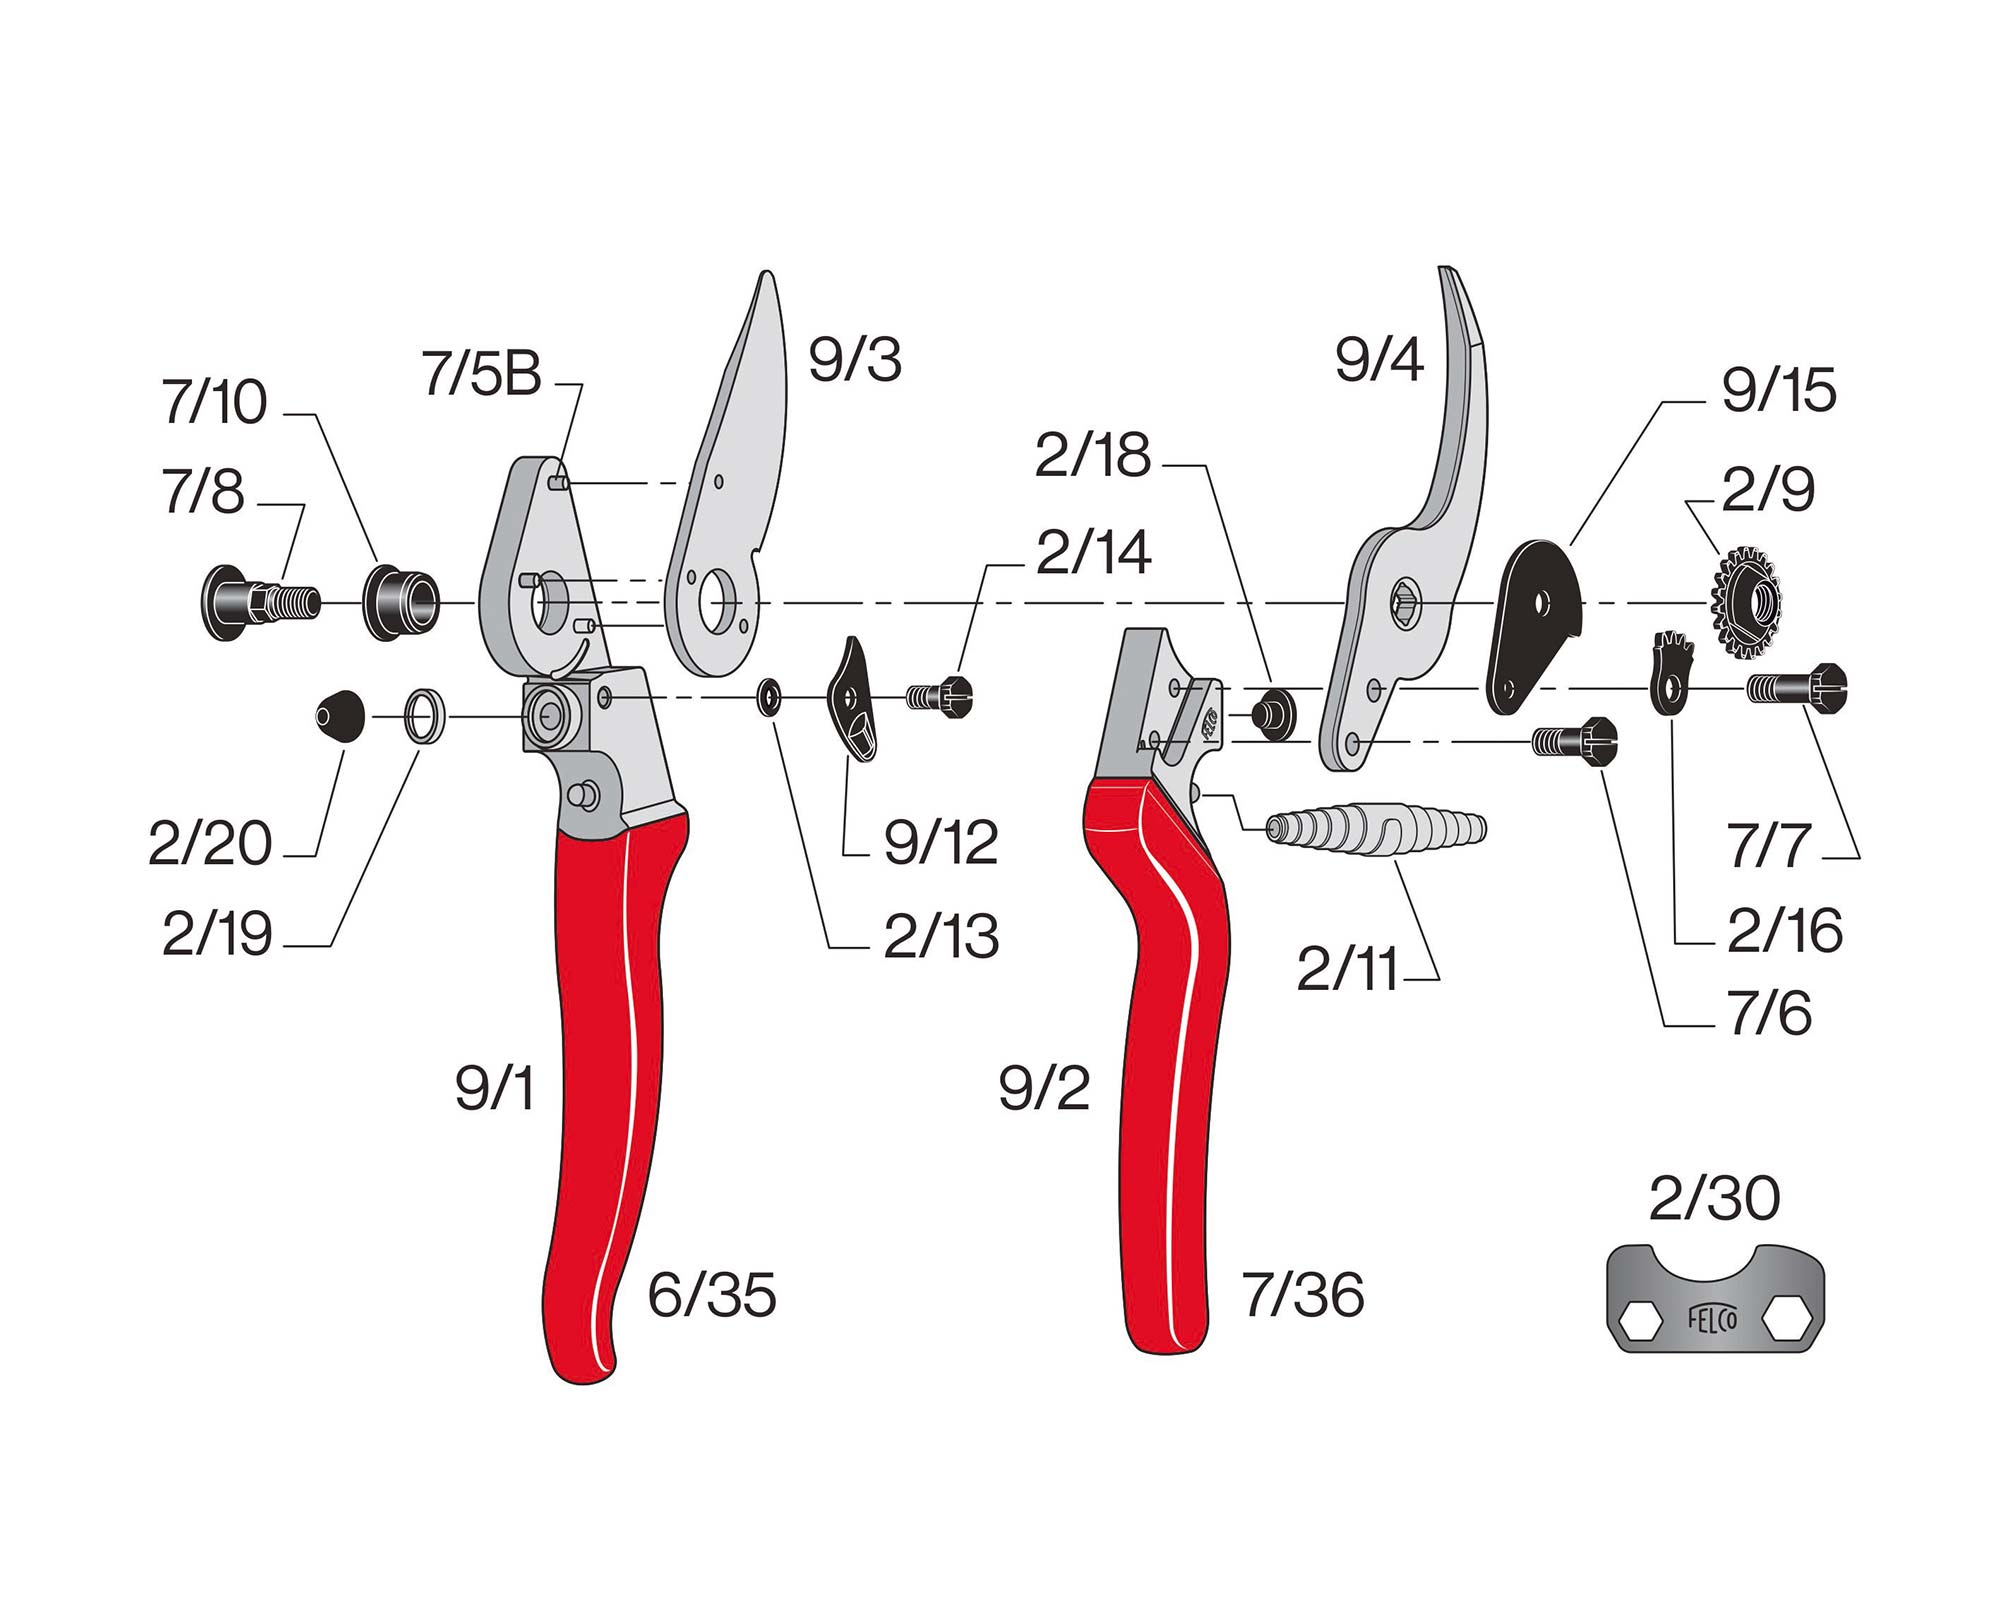 Exploded parts diagram for Felco9 secateurs